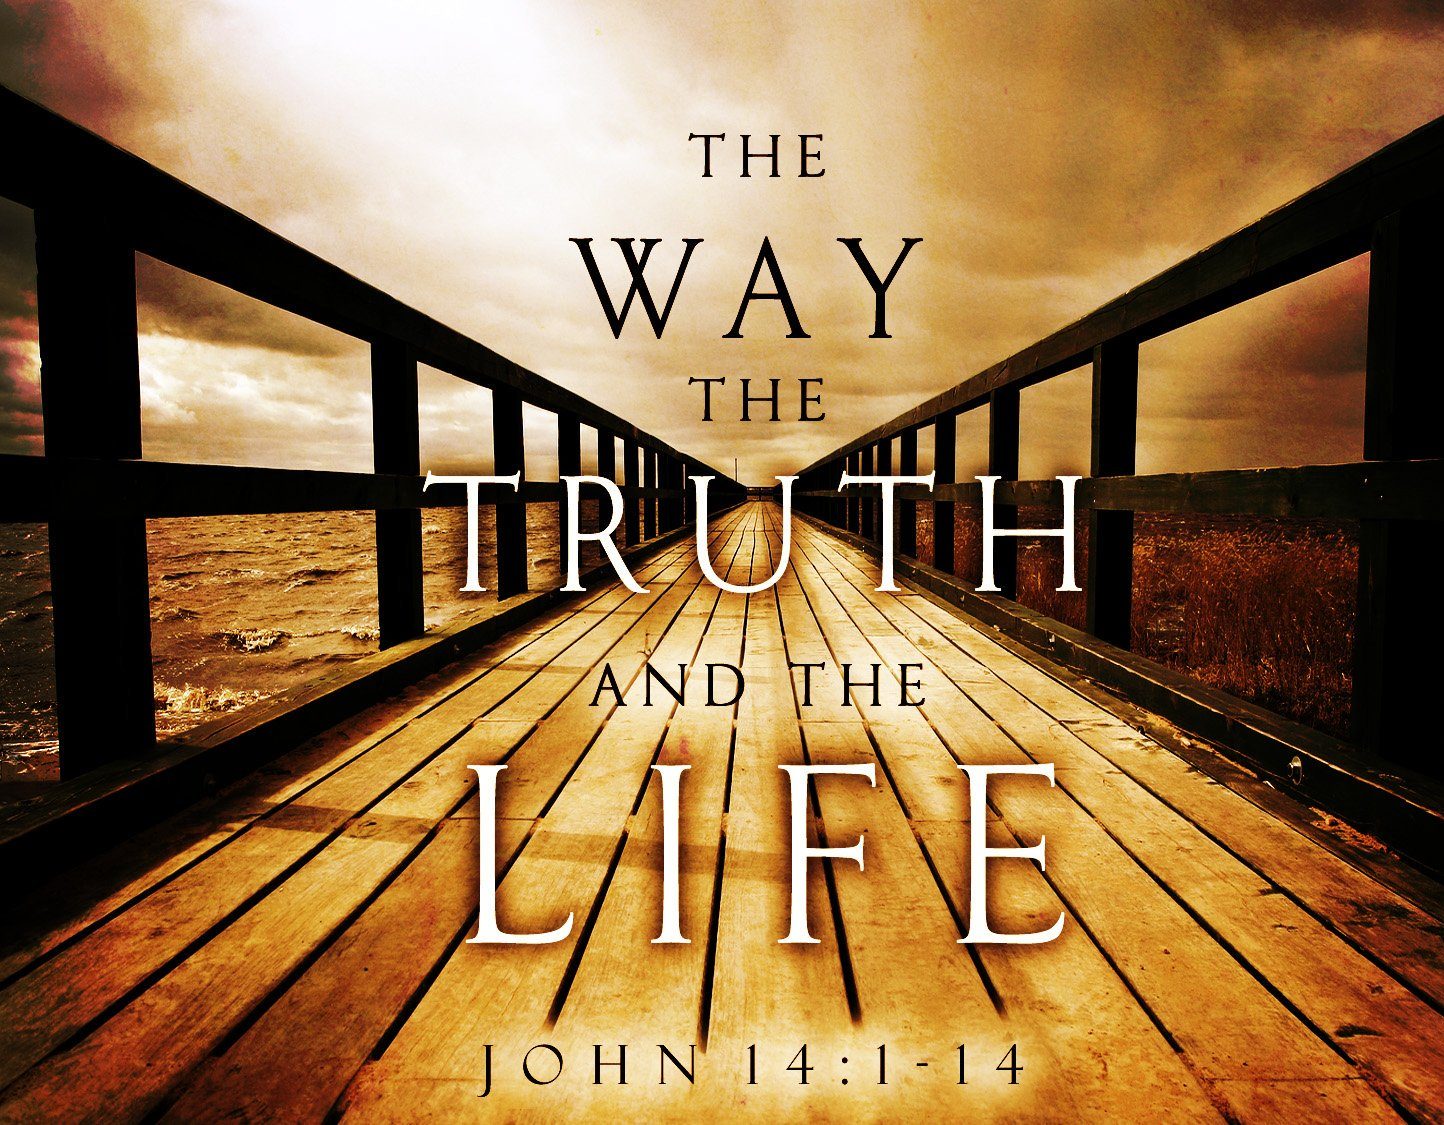 Jesus Christ – The Way The Truth and The Life